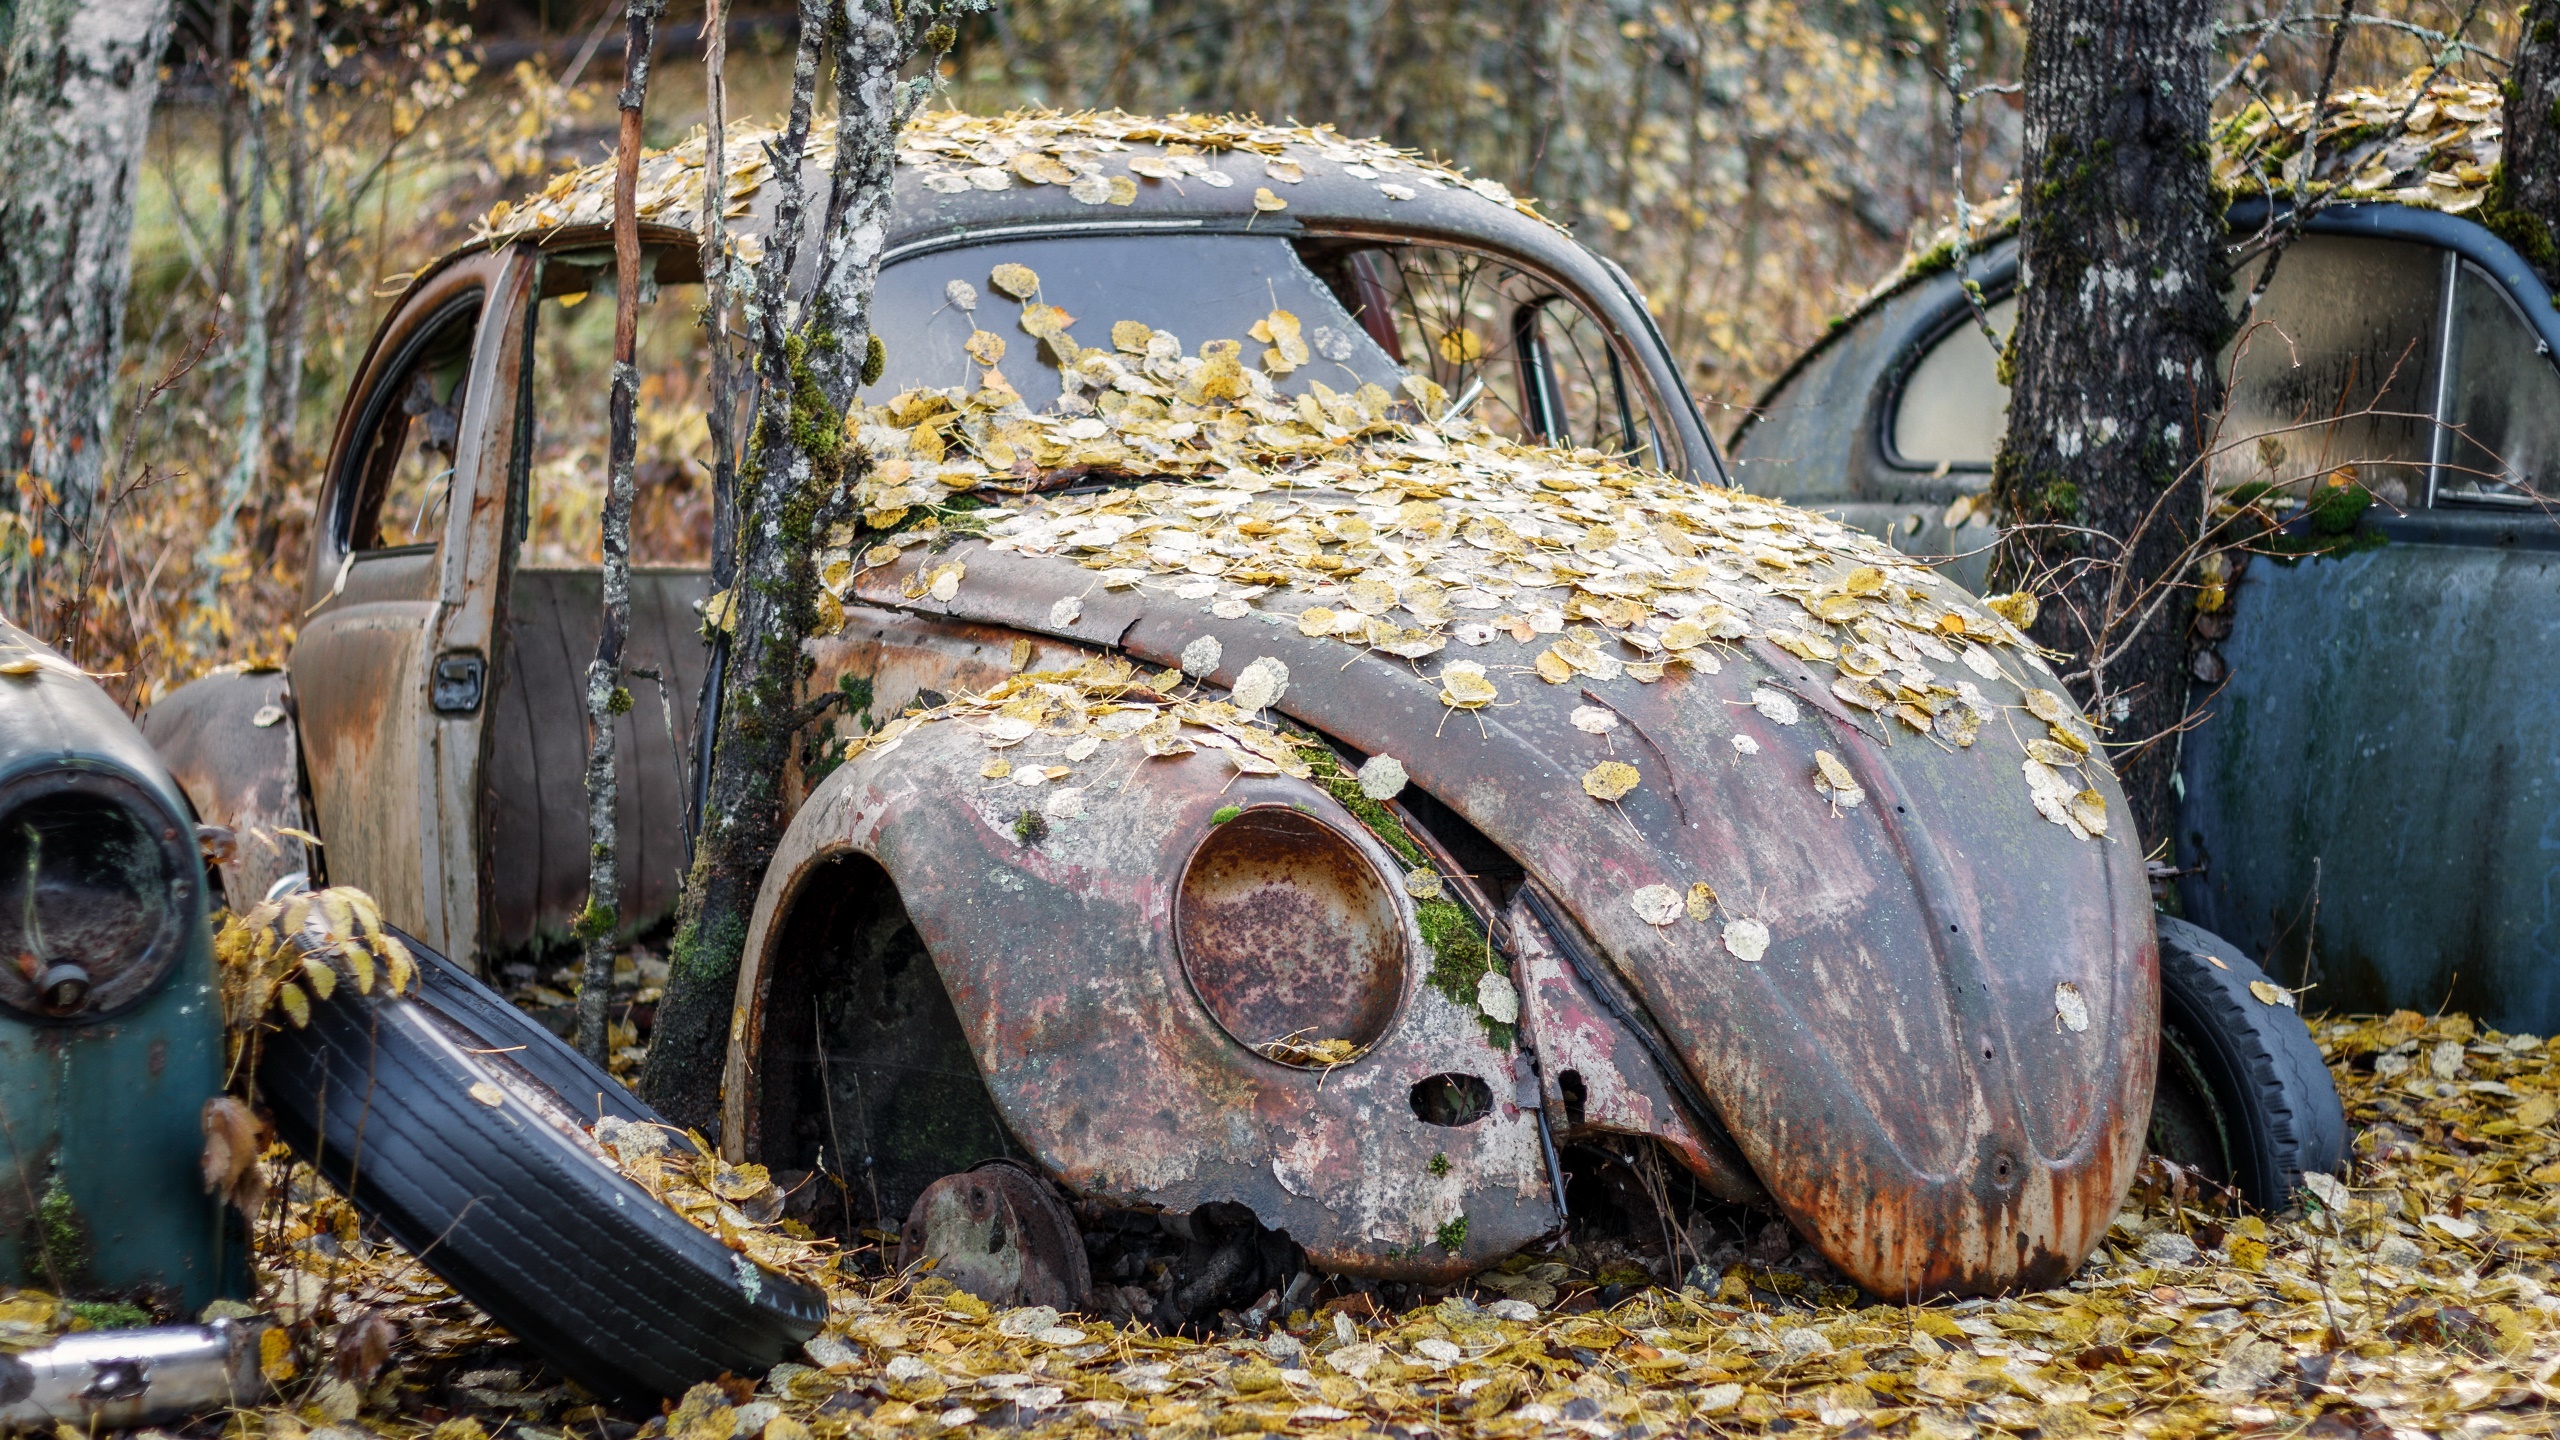 Car Volkswagen Rust Old Leaves Outdoors Wreck Vehicle 2560x1440